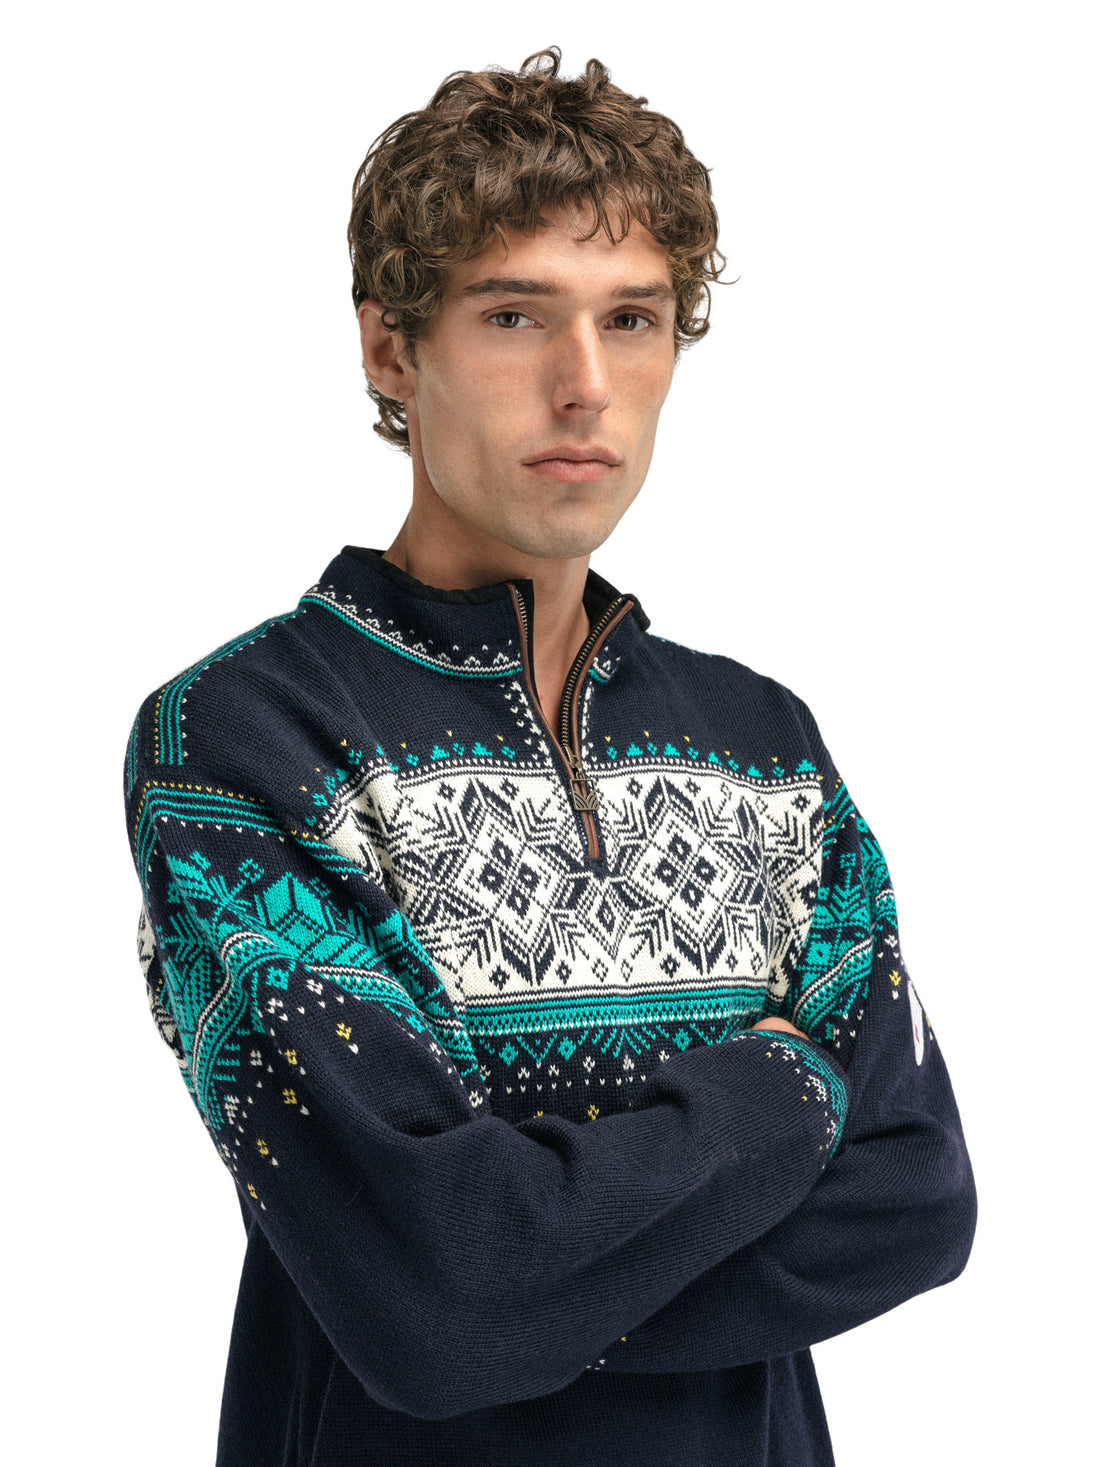 Dale of Norway - Blyfjell Unisex Sweater - Navy Peacock